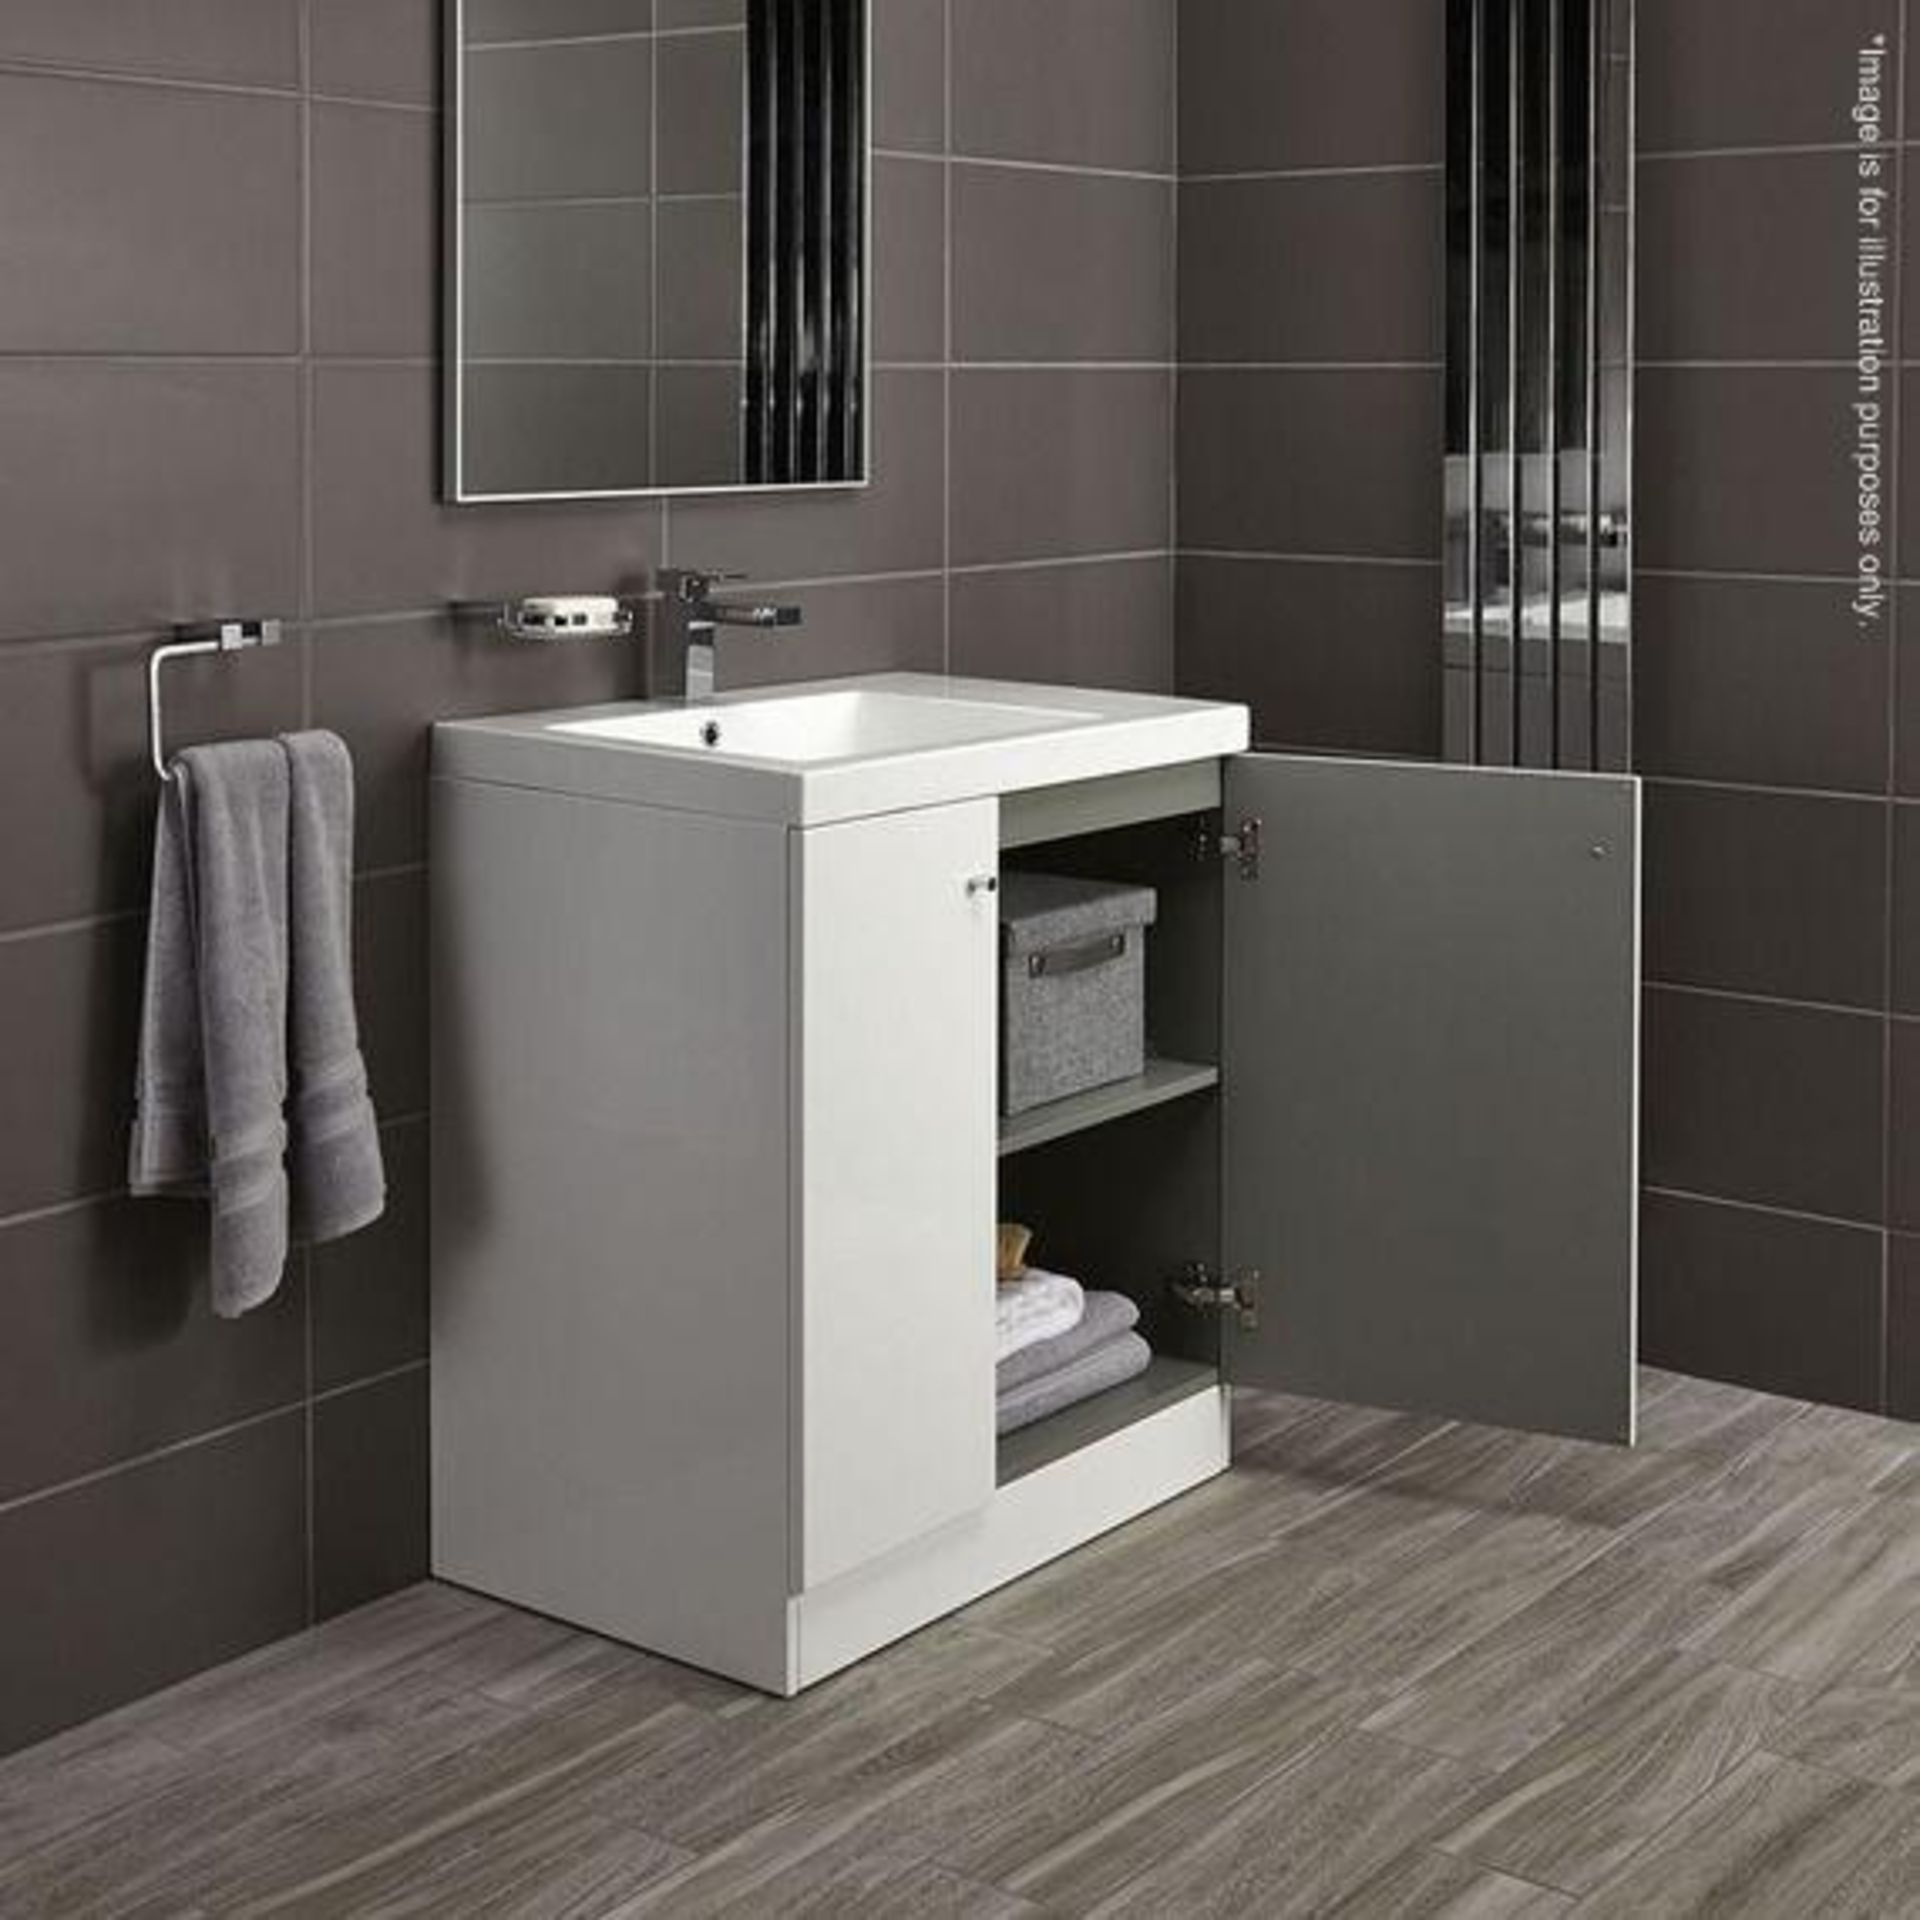 10 x Alpine Duo 750 Floorstanding Vanity Units In Gloss White - Dimensions: H80 x W75 x D49.5cm - - Image 2 of 4